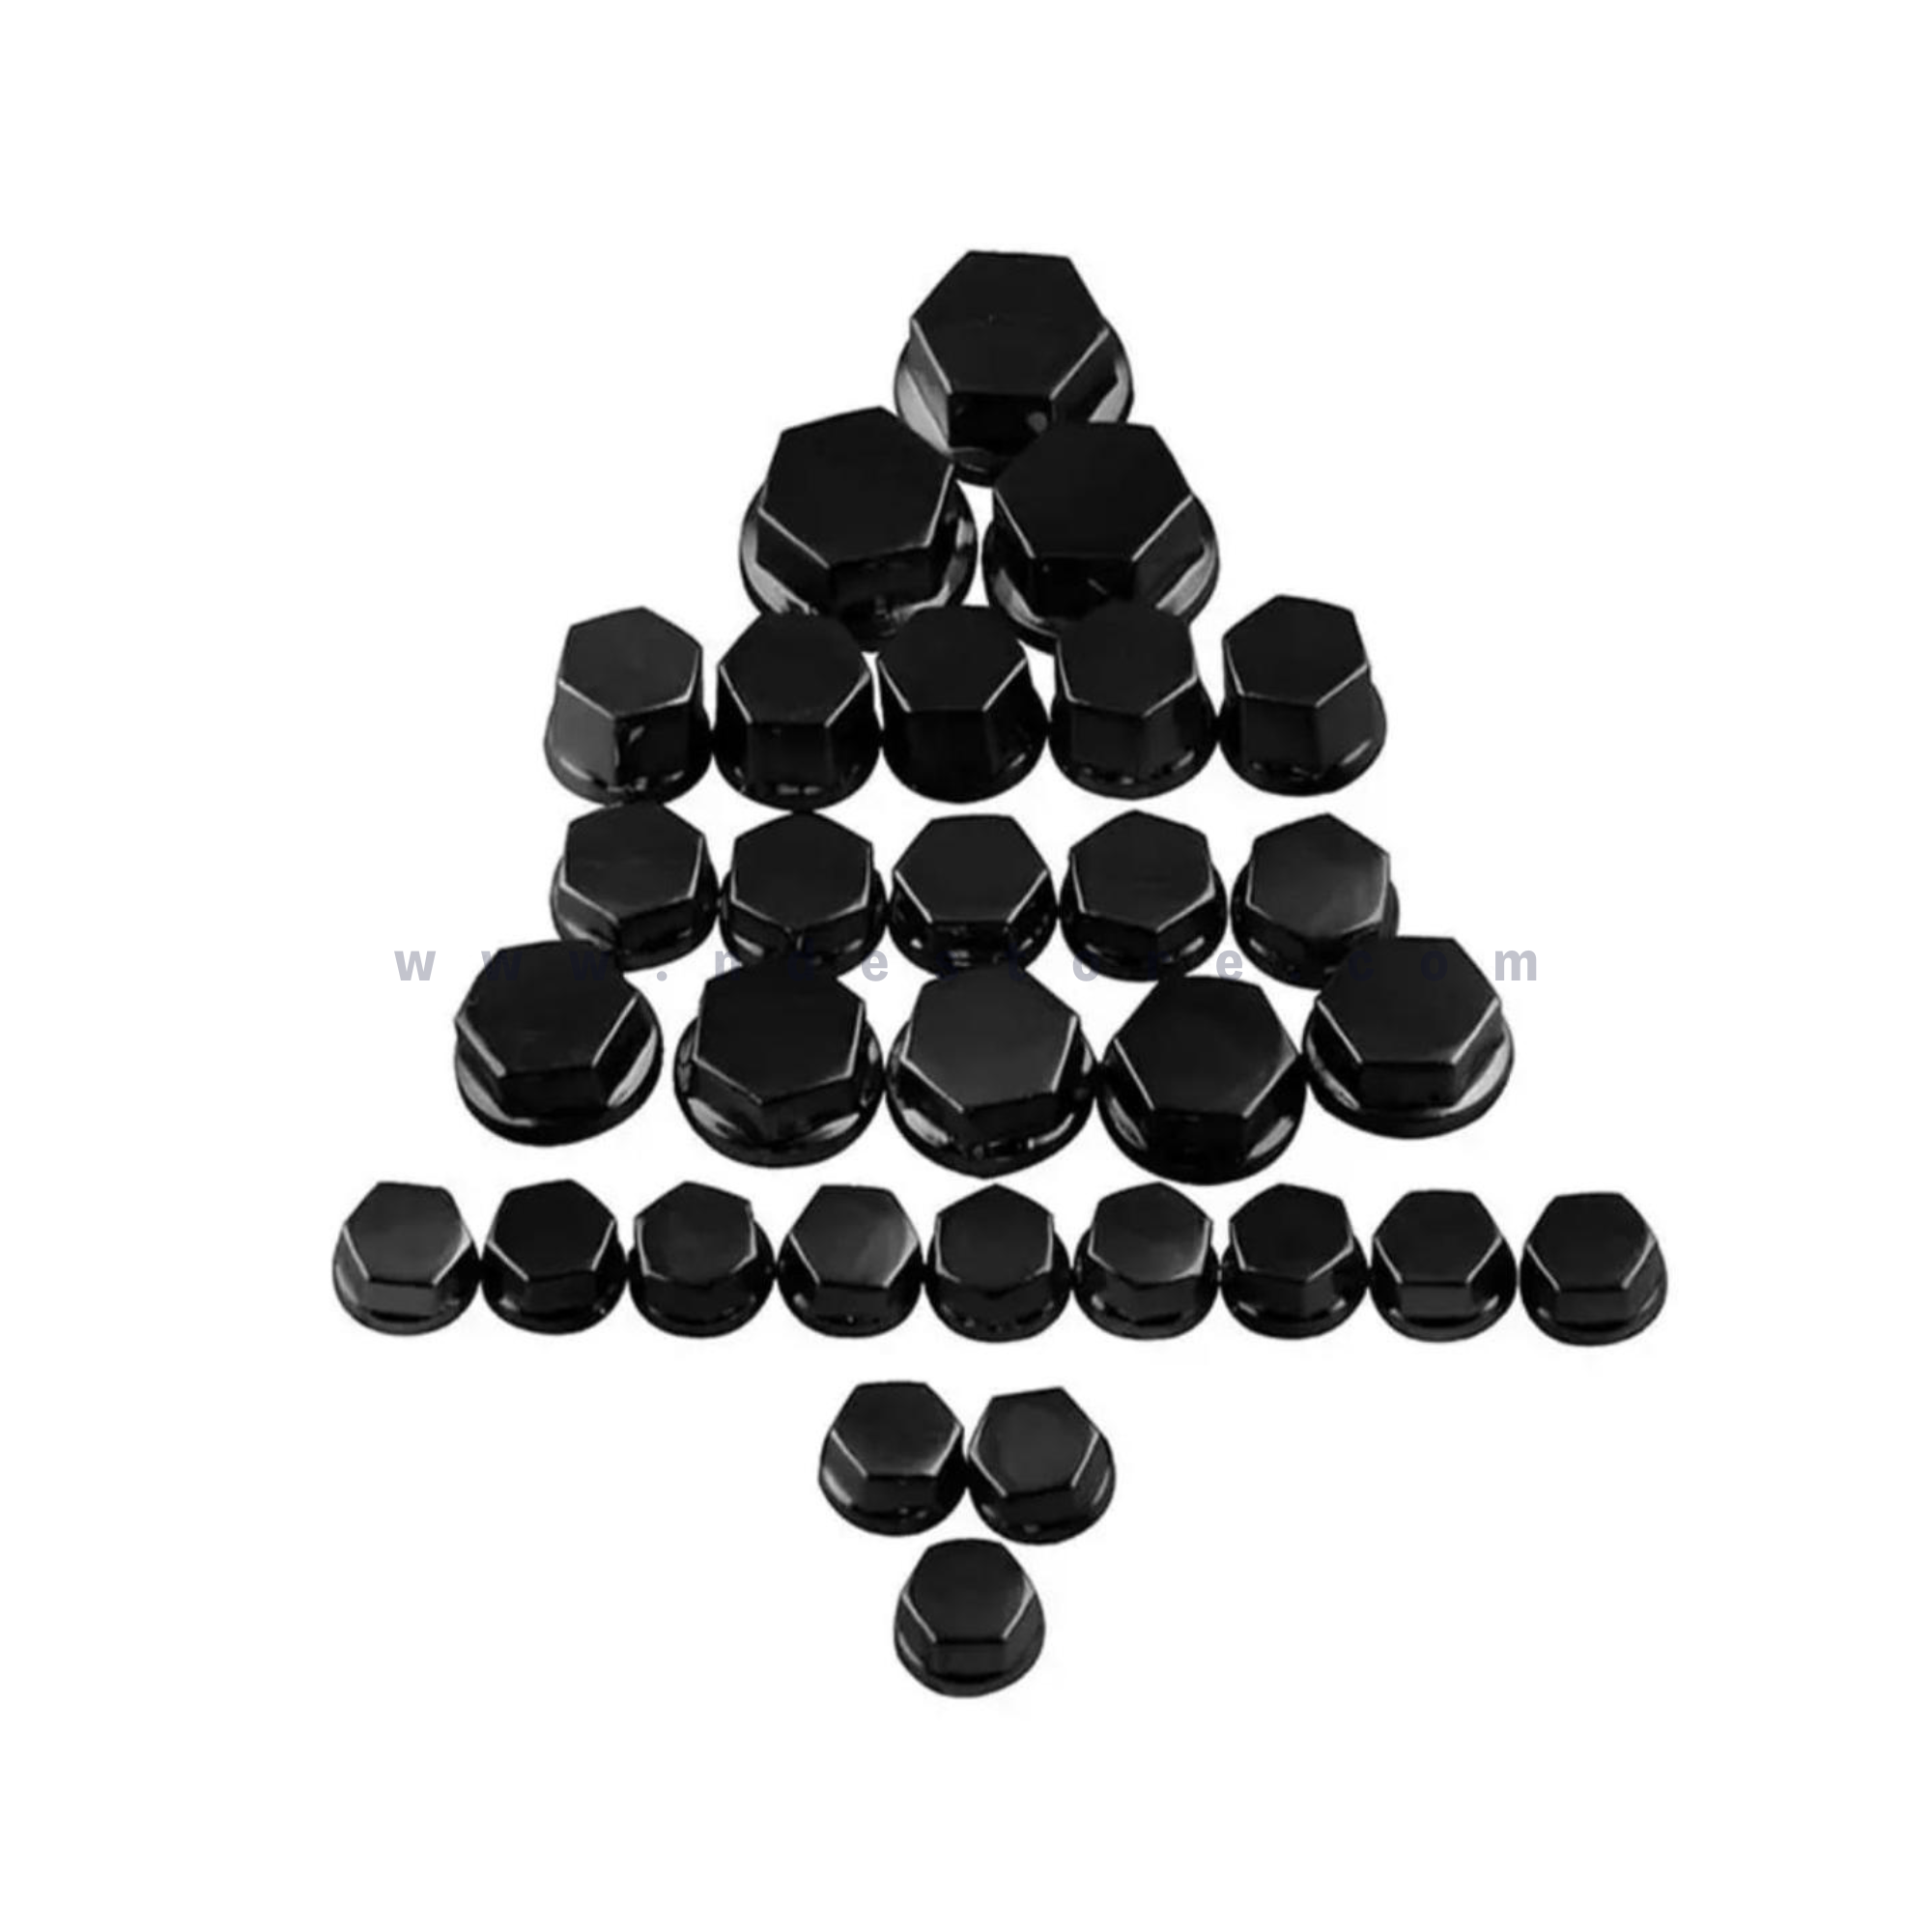 RUBBER NUT COVERS (30 PIECES)